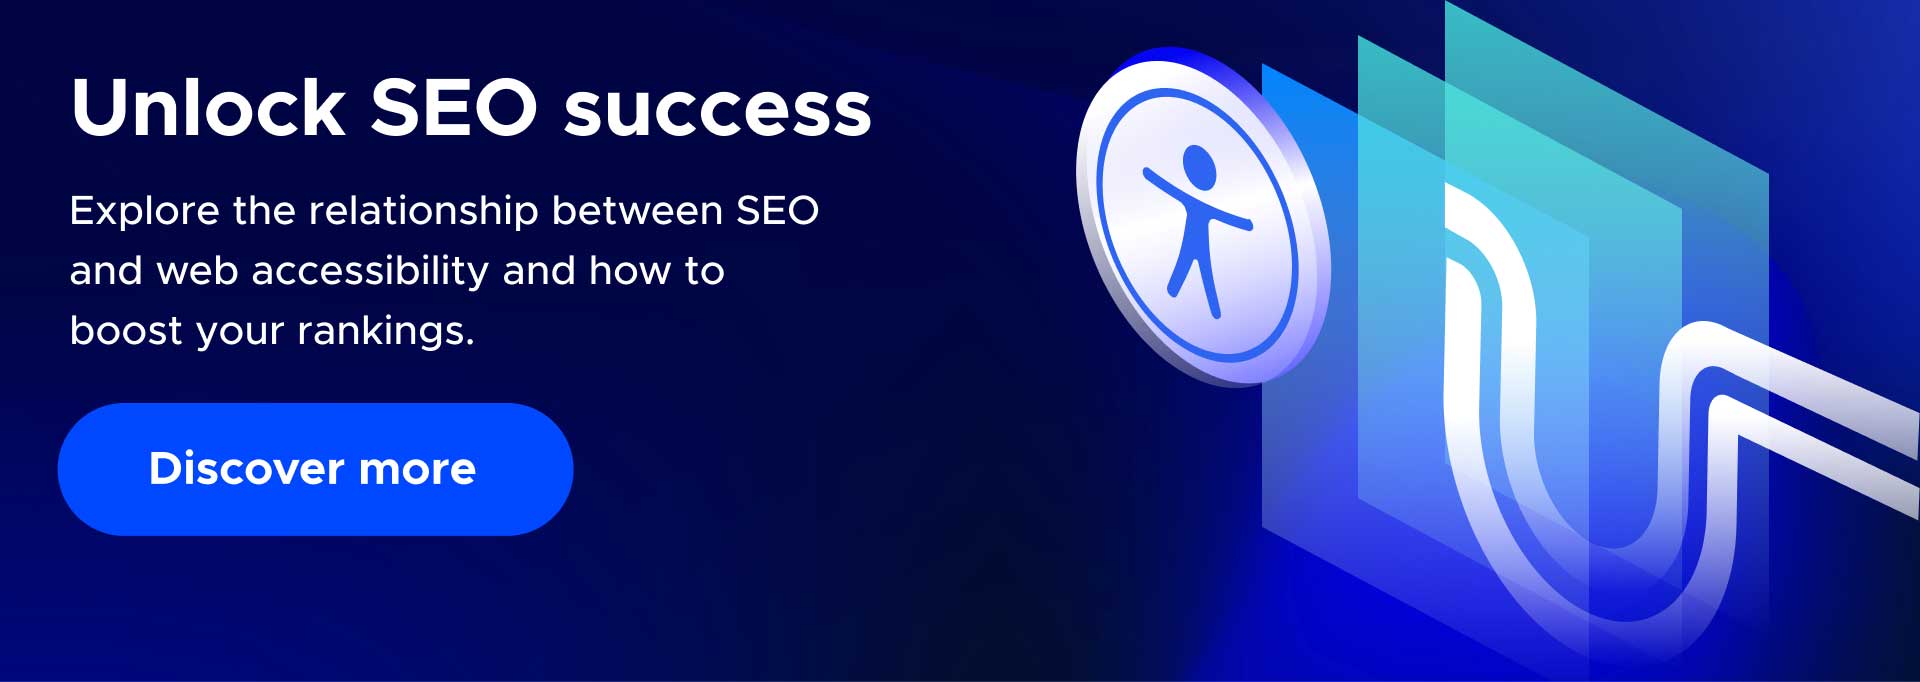 Explore the relationship between SEO and web accessibility and how to boost your rankings.